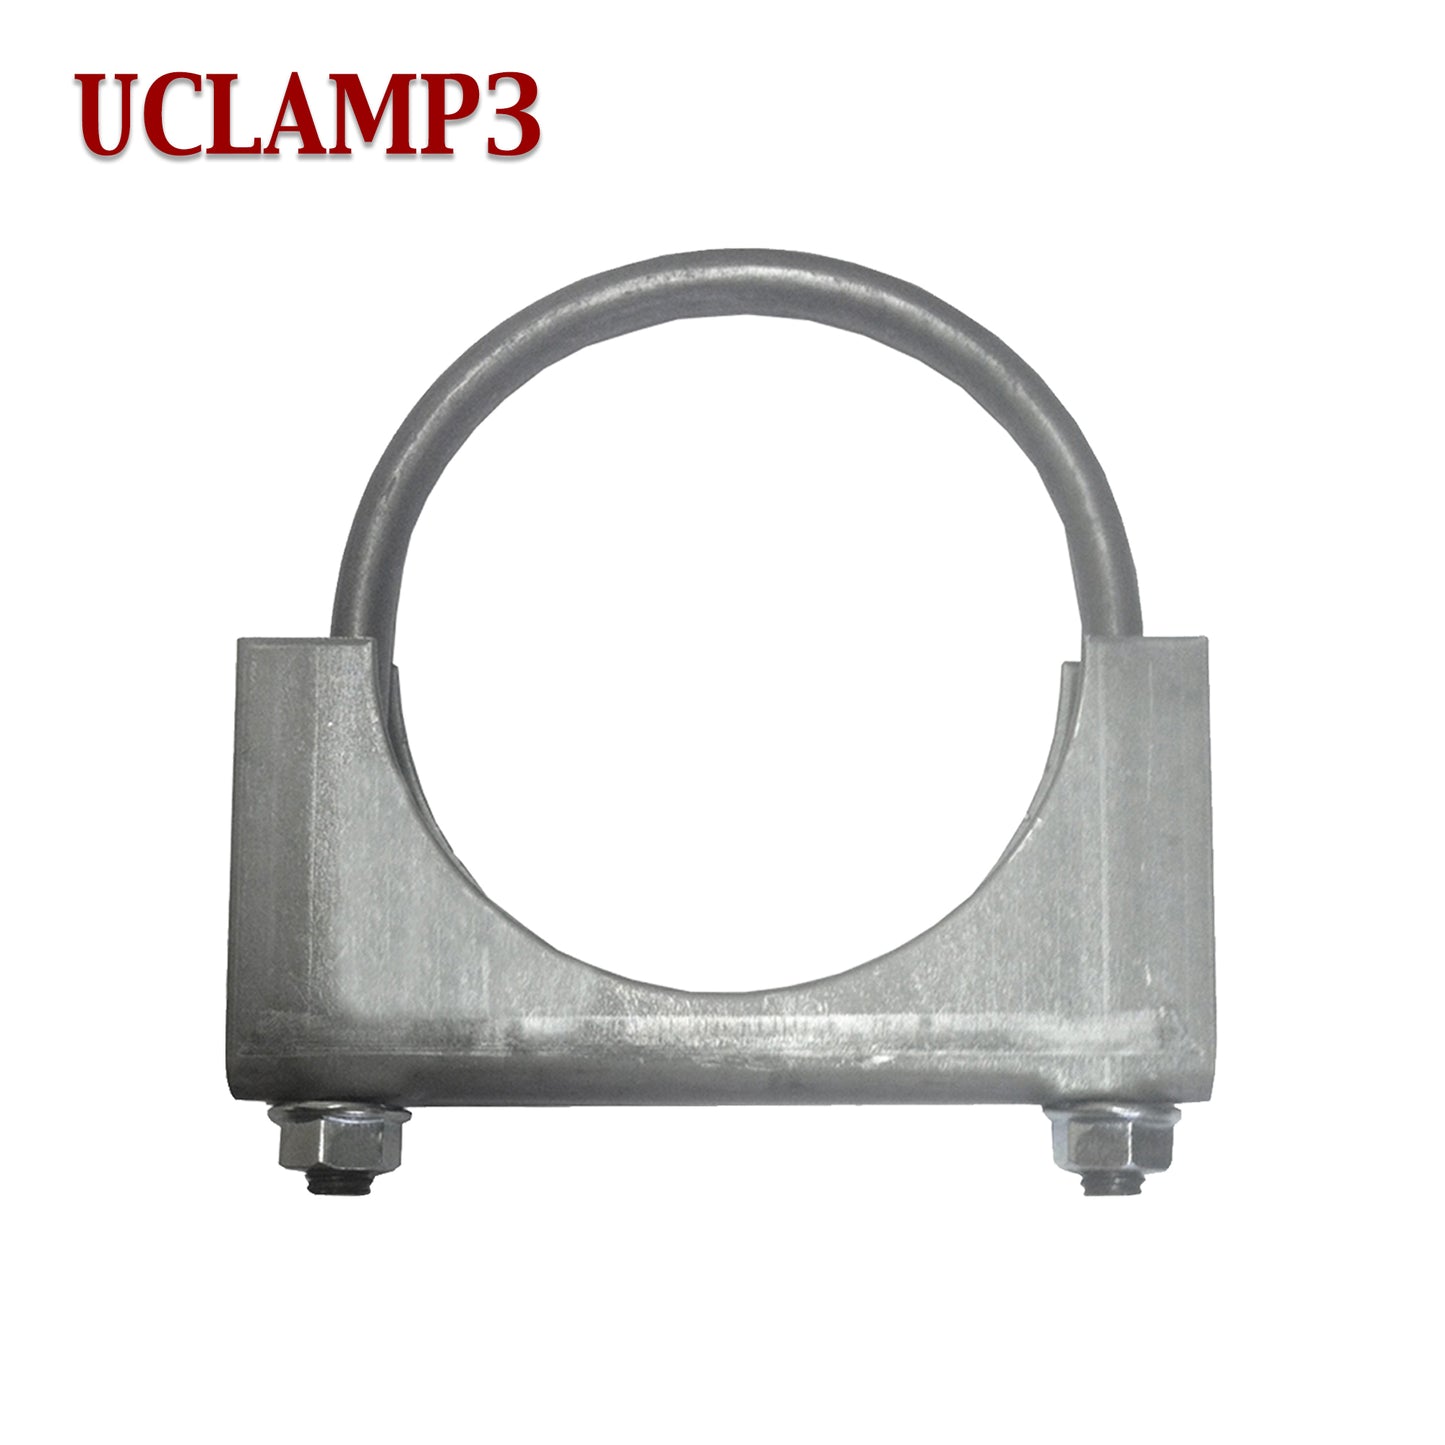 3" Exhaust Muffler Clamp U-Bolt Saddle Style For 5/16" Rod